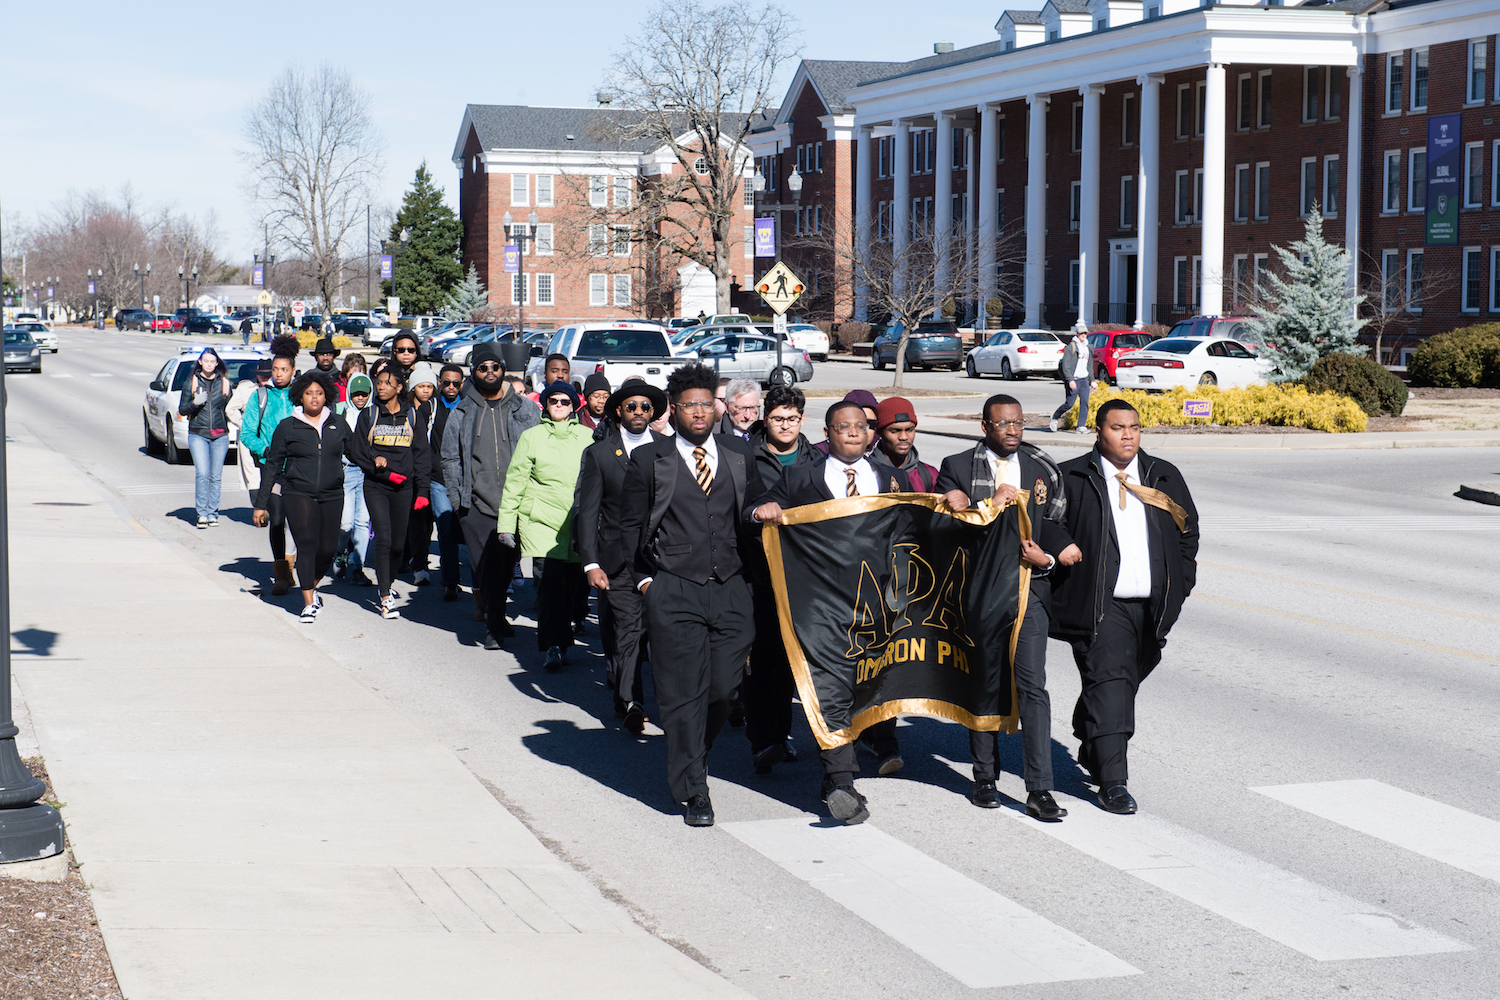 On Tuesday, Jan. 21, at 11 a.m. the Omicron Phi Chapter of Alpha Phi Alpha Fraternity Inc. will host its annual Dr. Martin Luther King Jr. Silent March on the president’s lawn. 